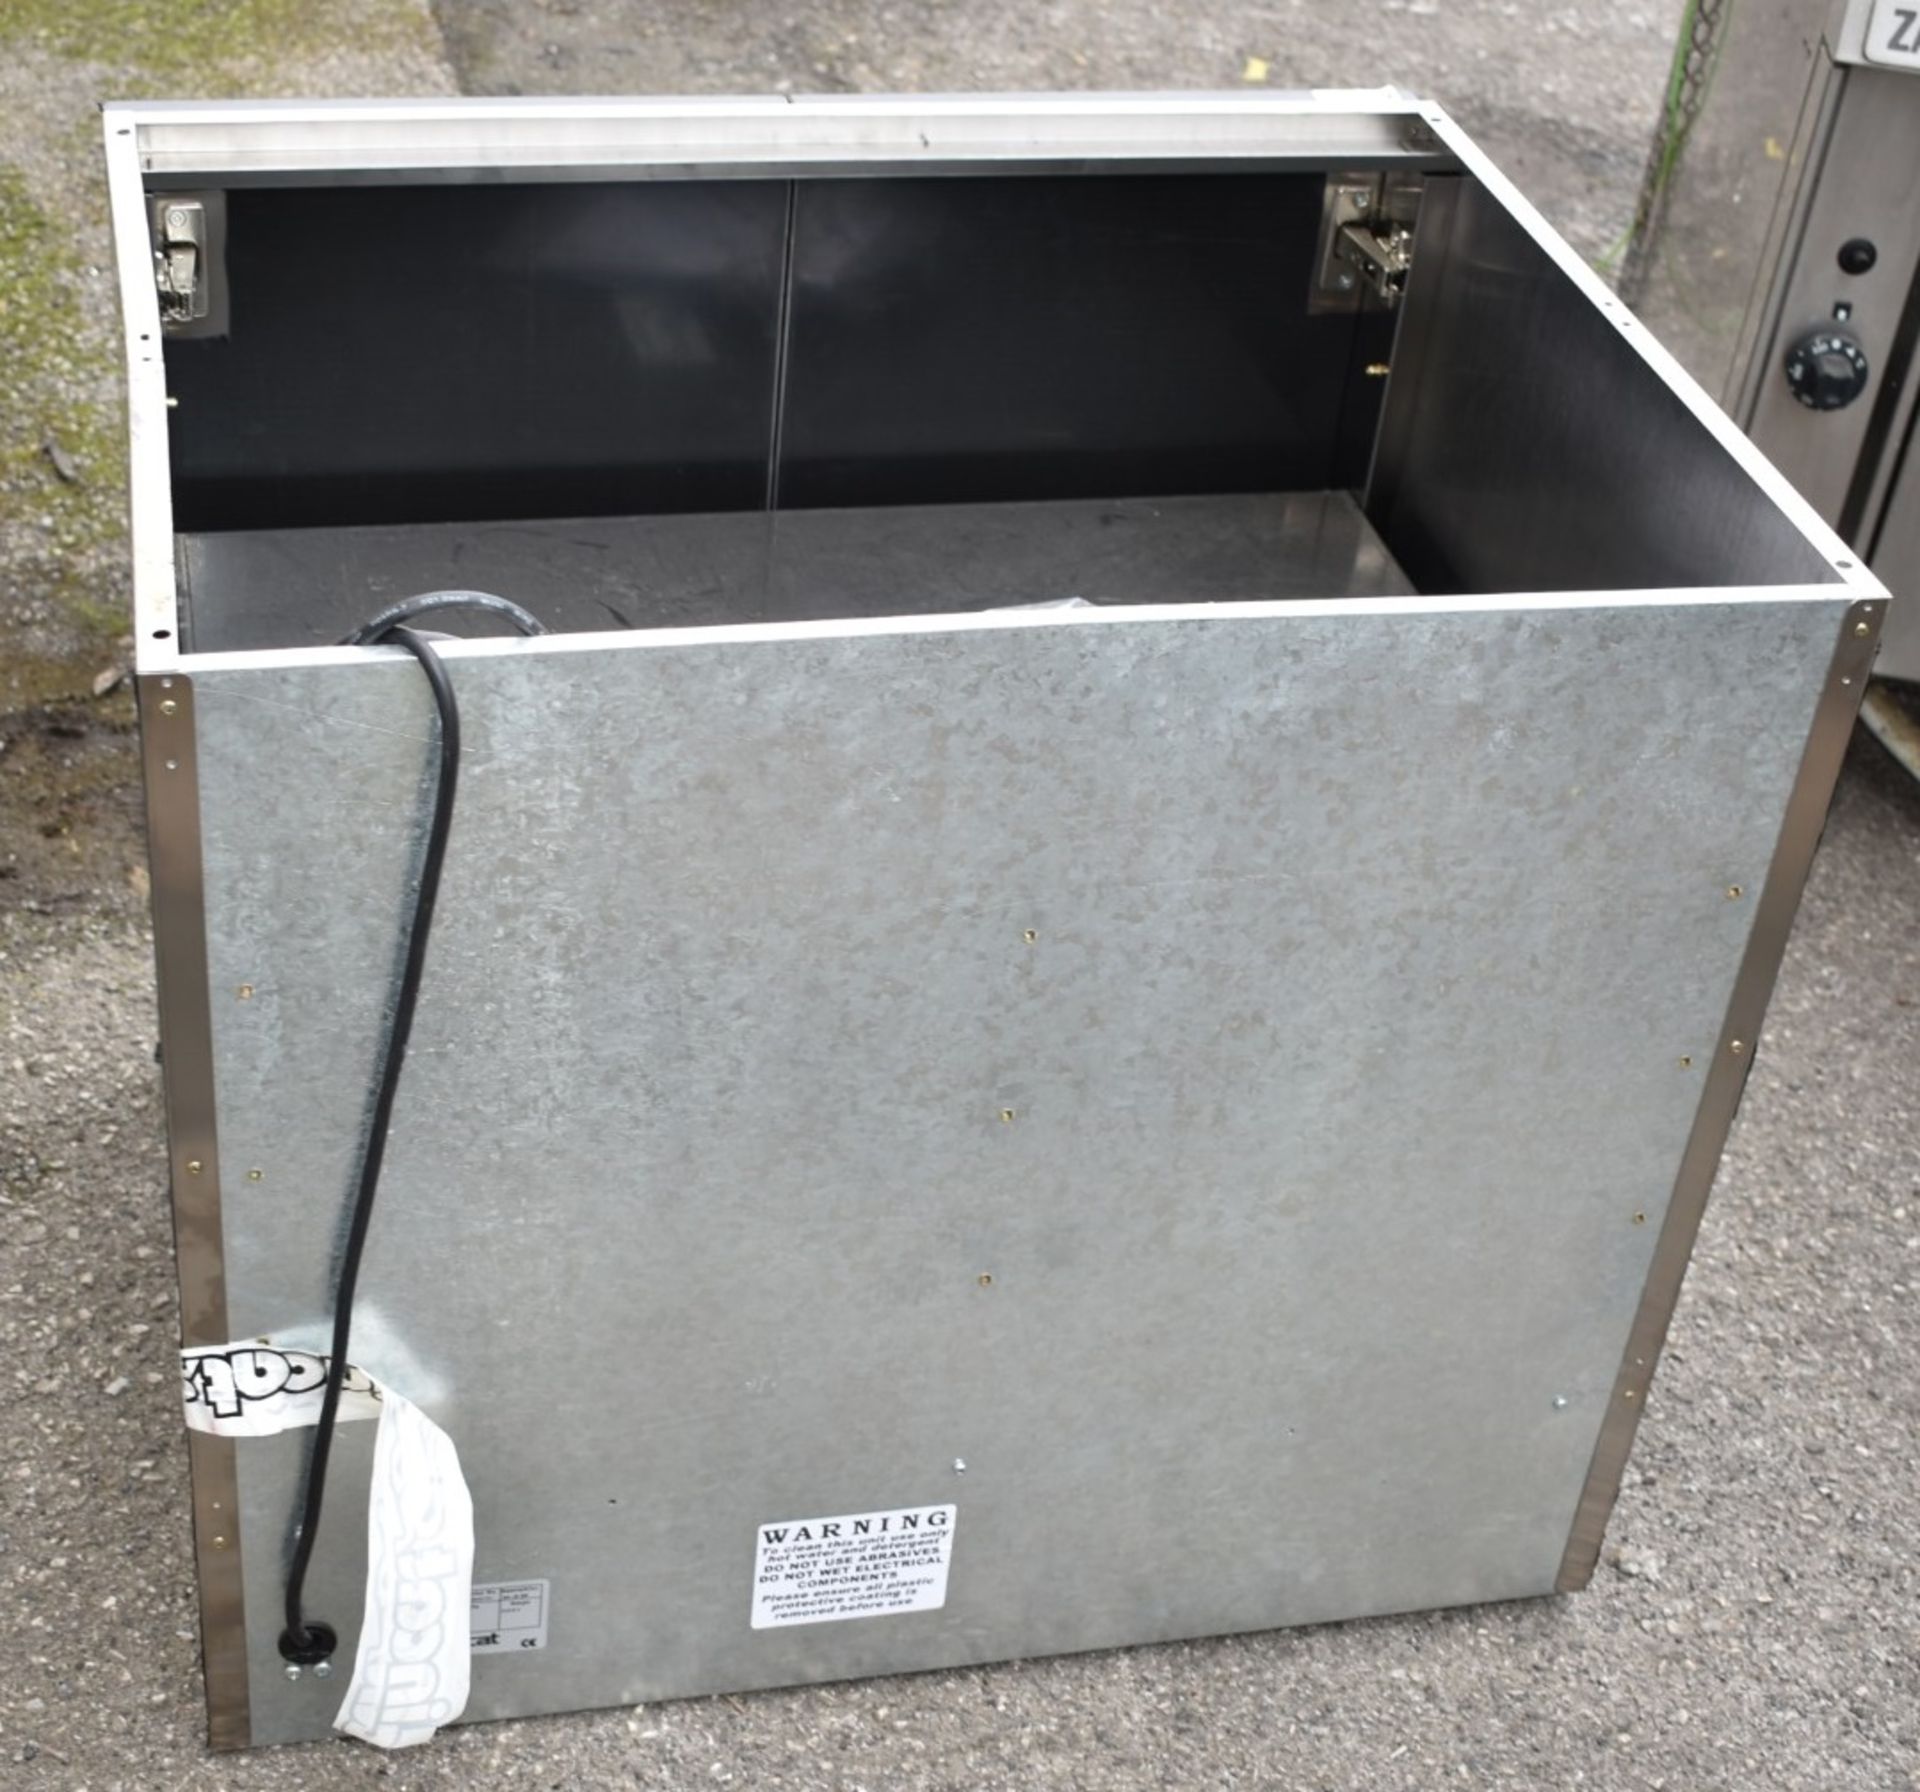 1 x Lincat HC7 Silverlink Stainless Steel Heated Base Pedestal With Doors For Lincat Silverlink - Image 3 of 8